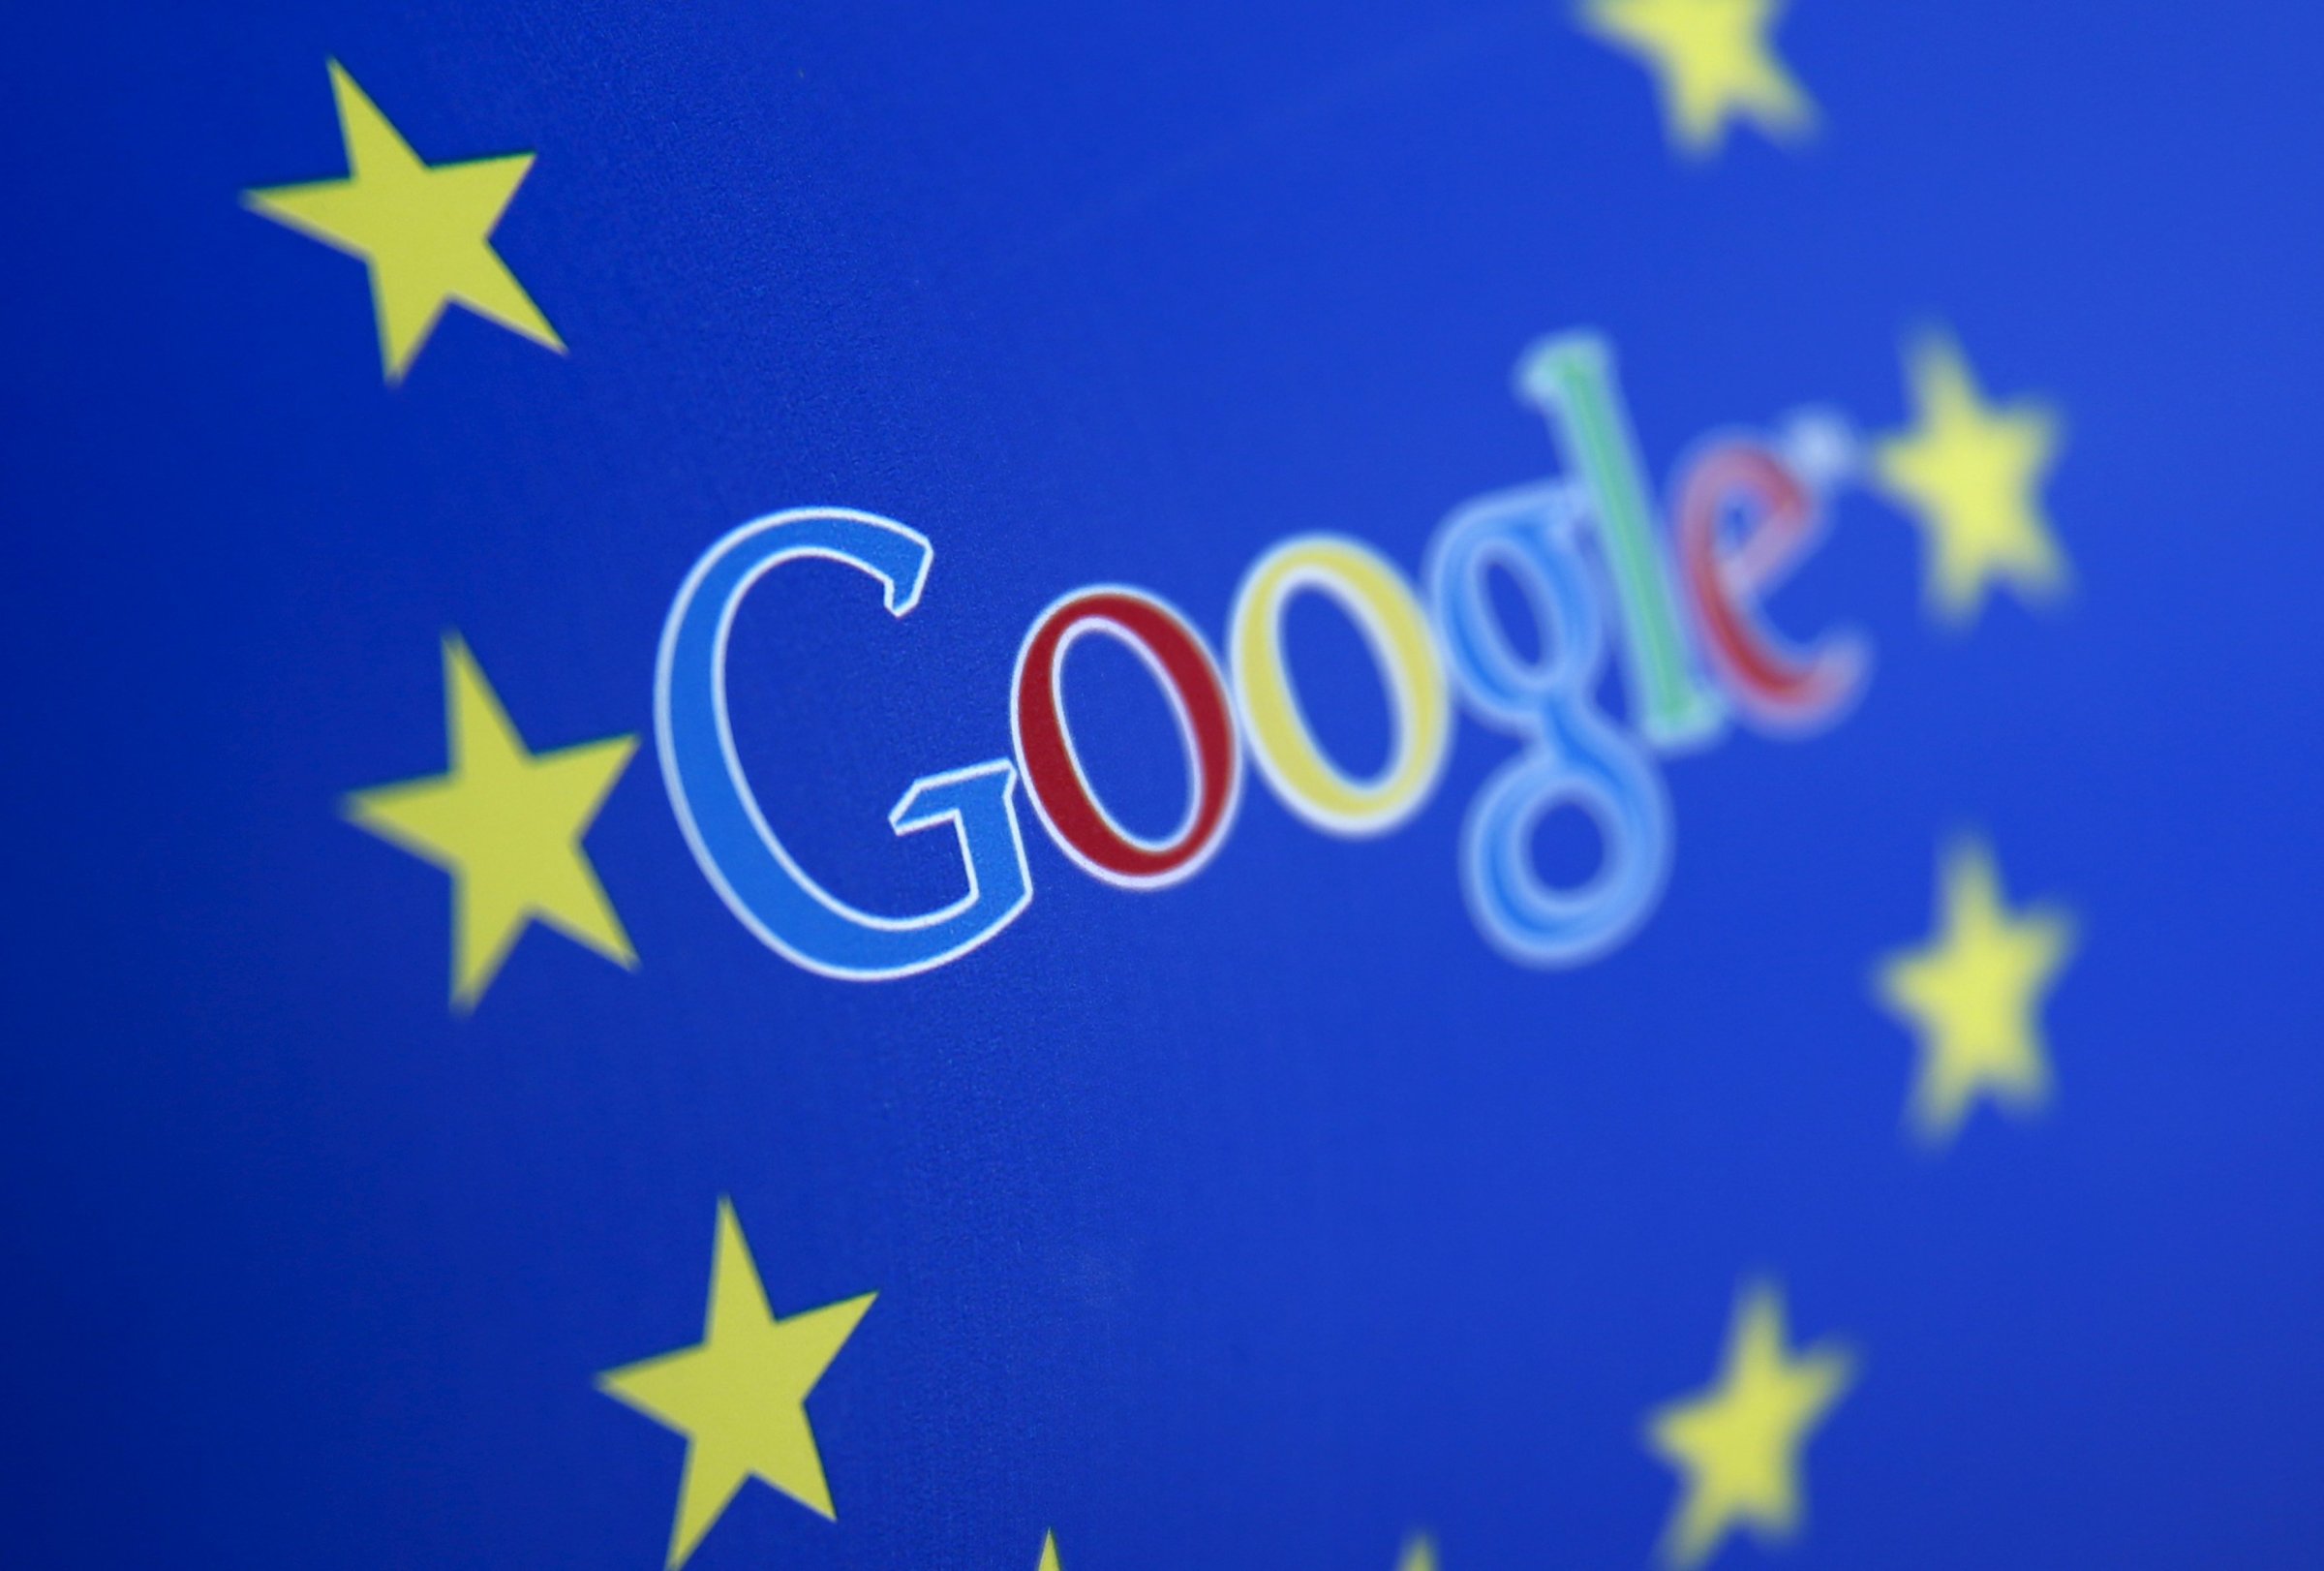 Google and European Union logos are seen in Sarajevo, in this April 15, 2015 photo illustration.